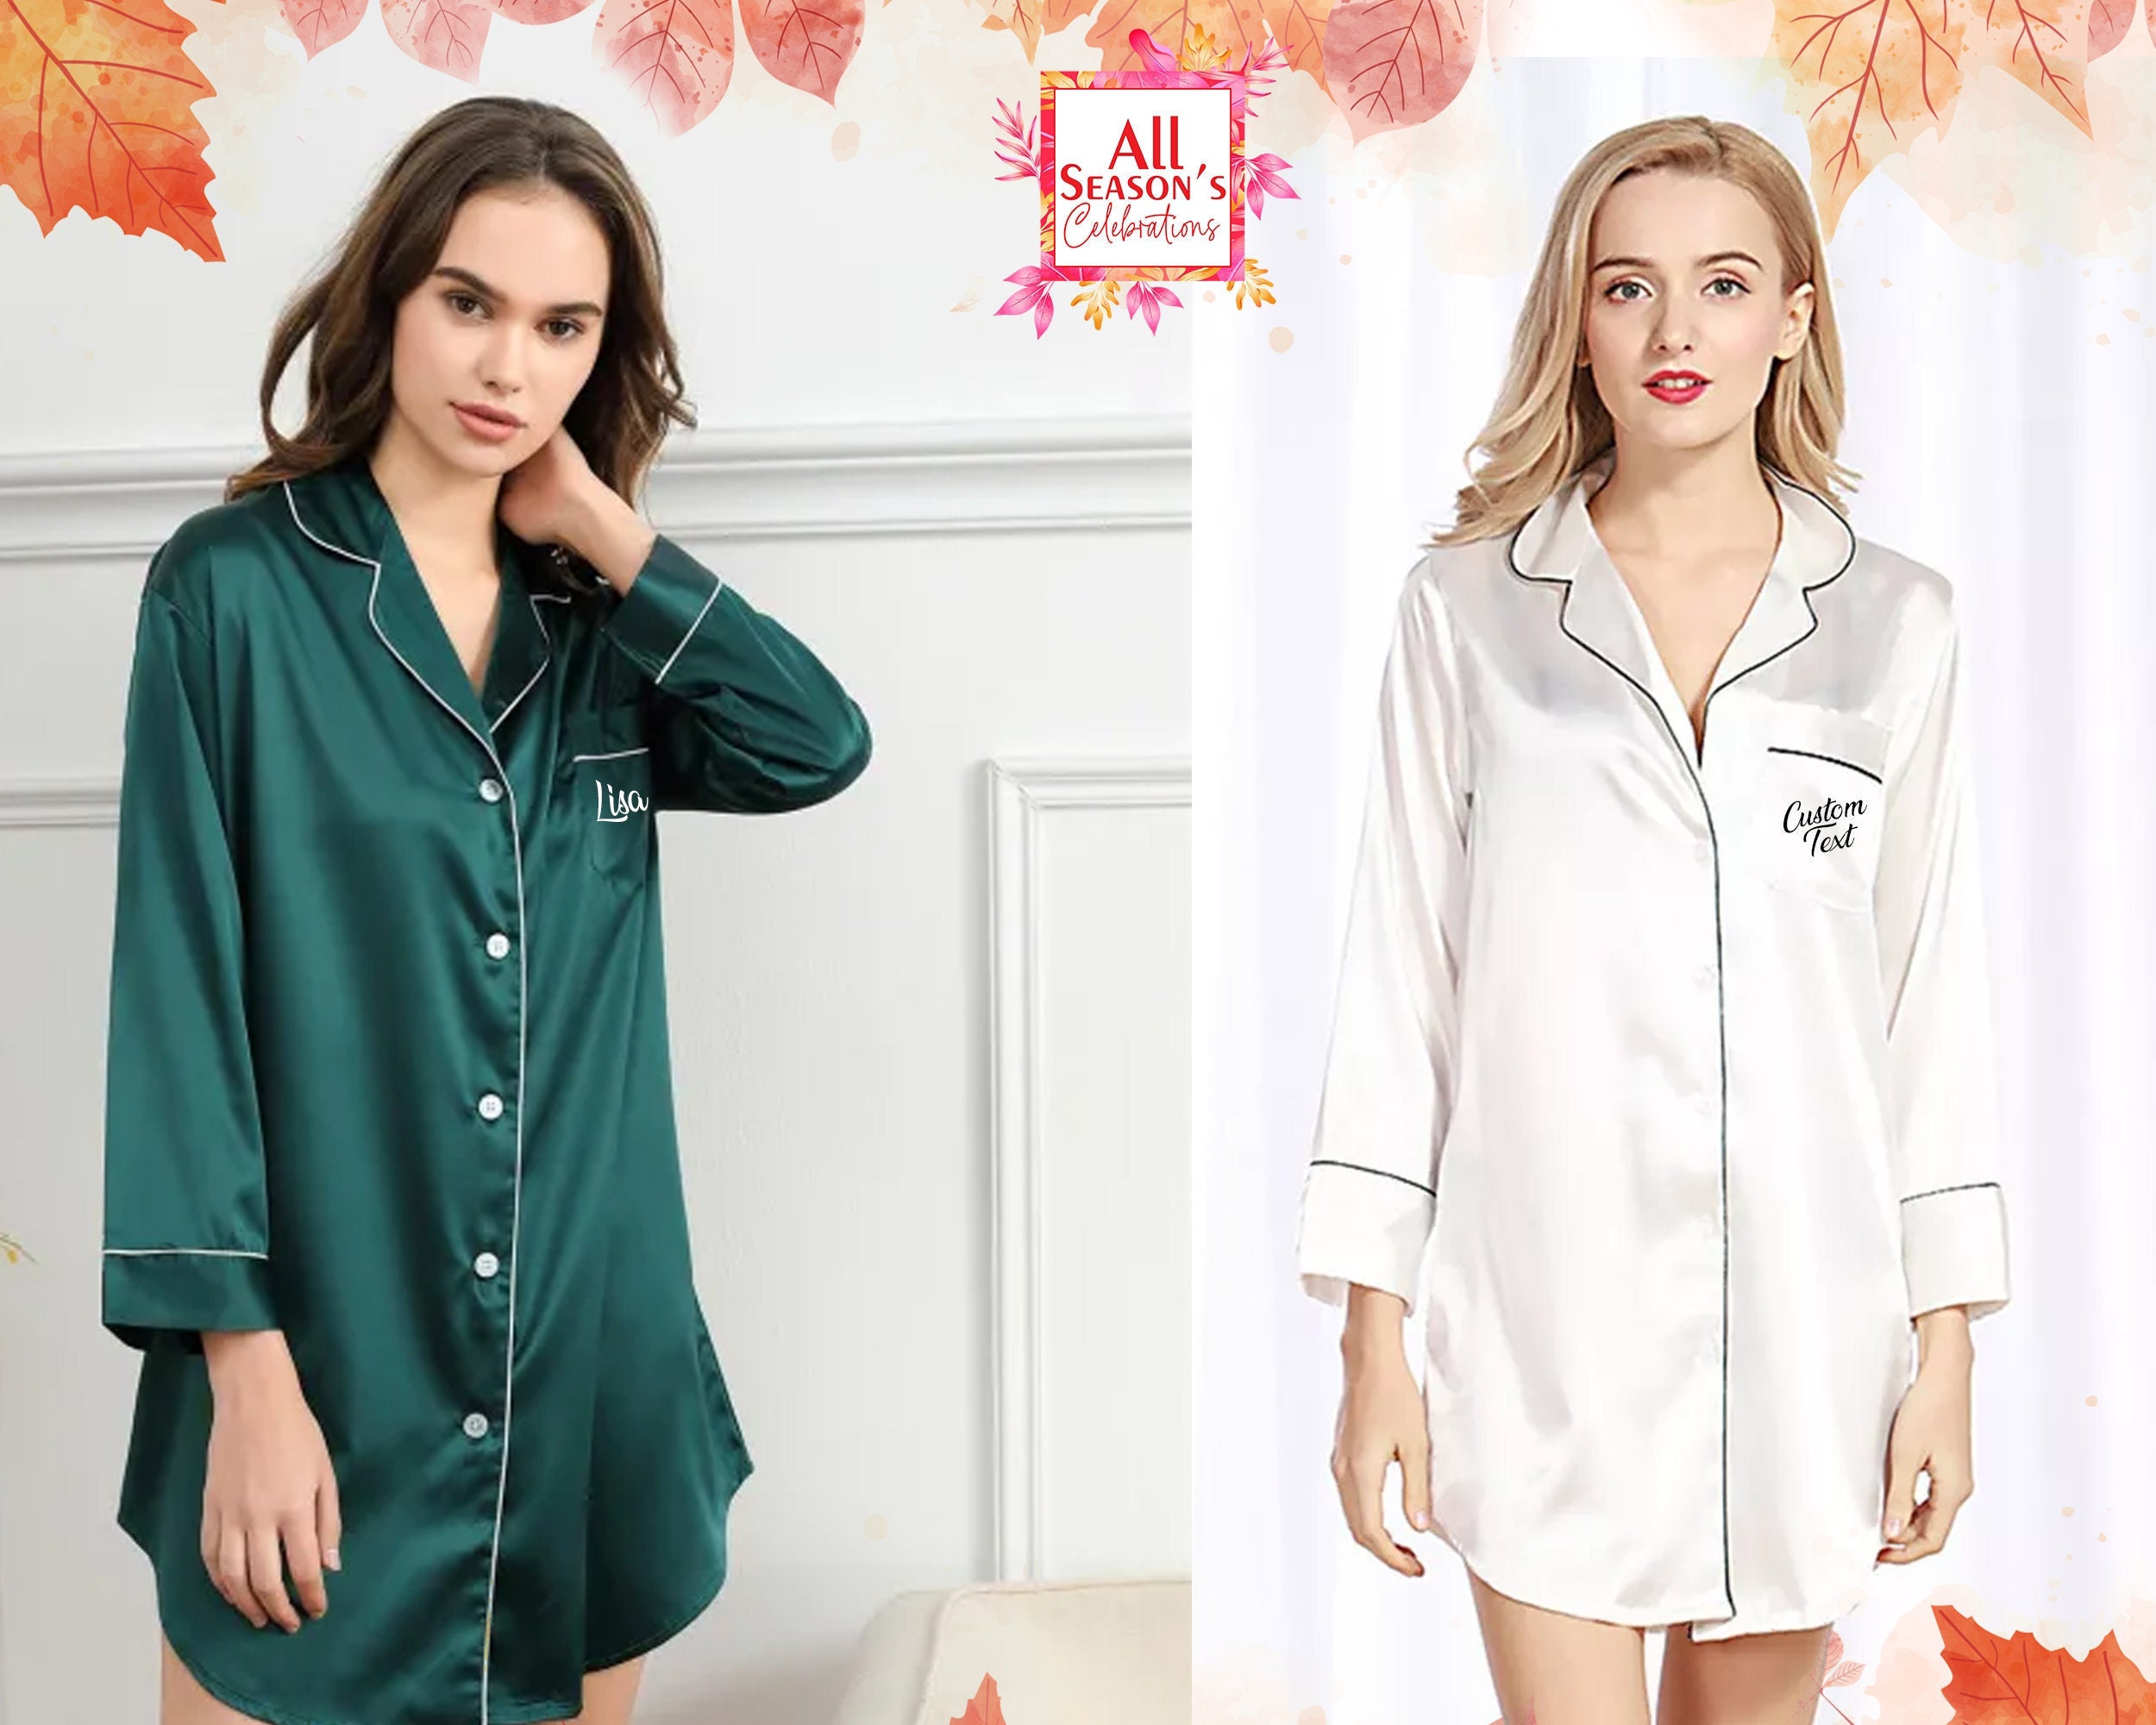 Personalised Pyjamas, Robes & Lingerie: 25 Places to Shop